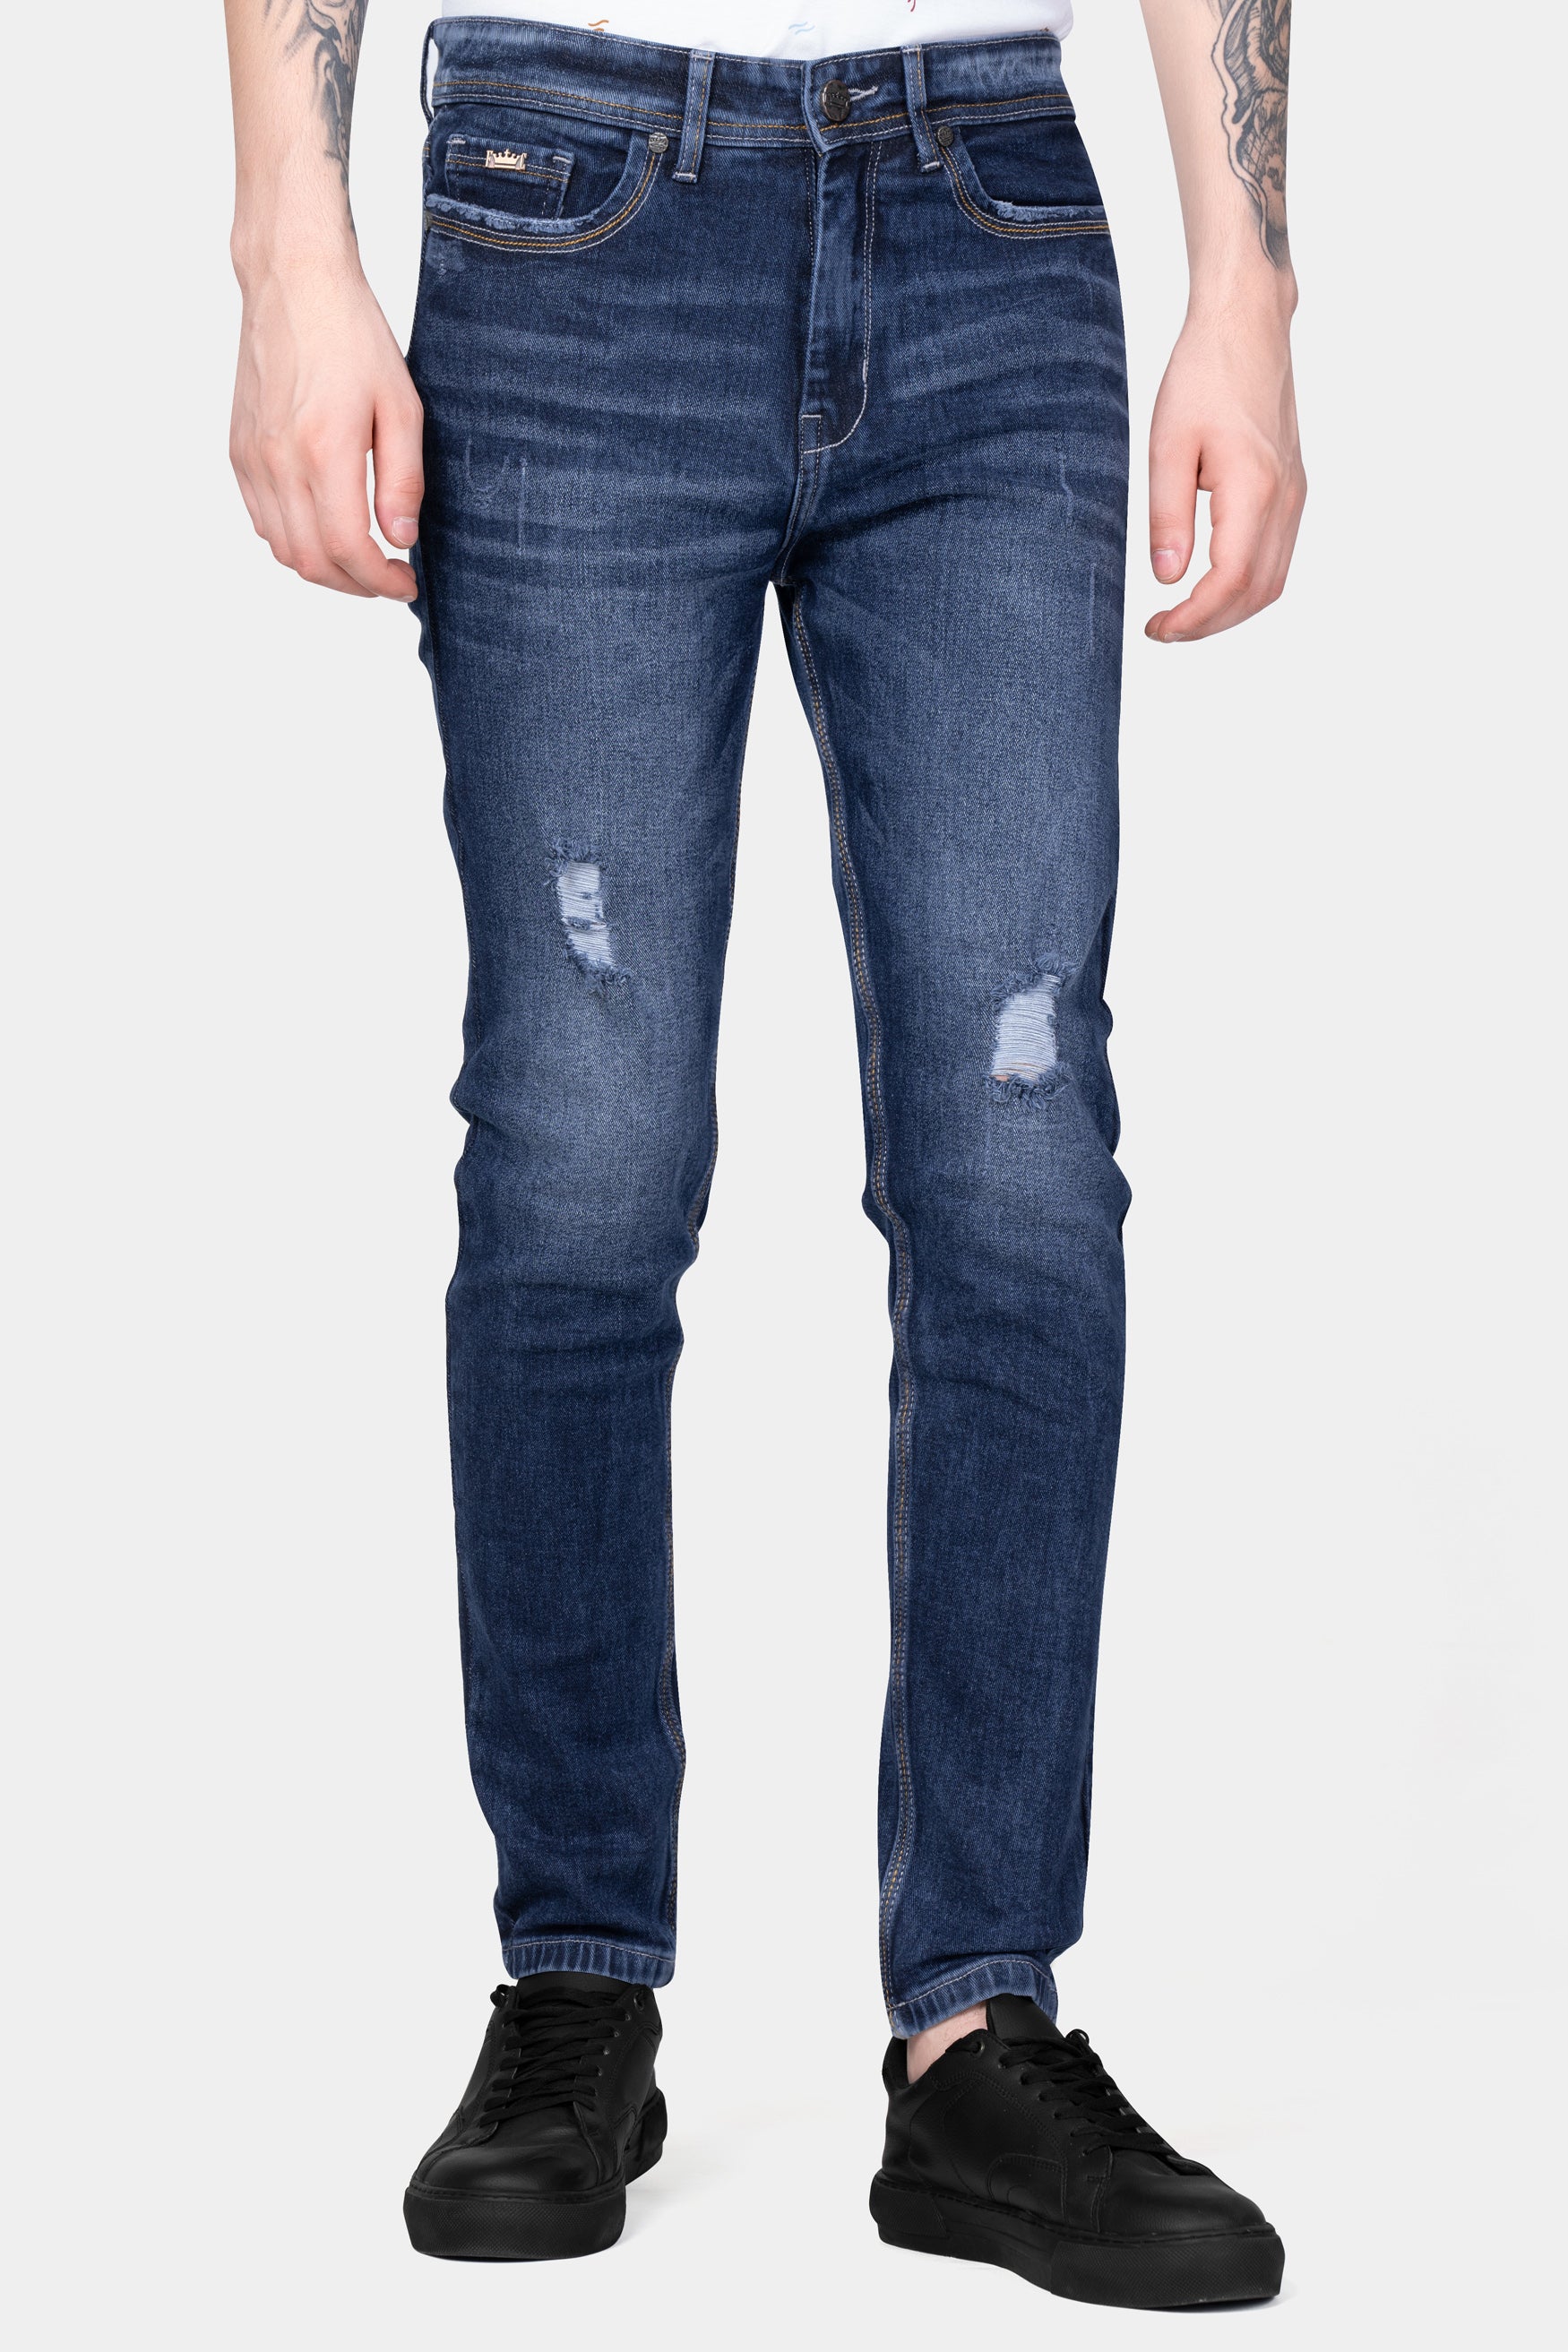 Vintage Slim Fit Jeans With Painted Stitch Detail For Men Distressed Denim  Jeans Trousers For Men From Bigget, $28.9 | DHgate.Com